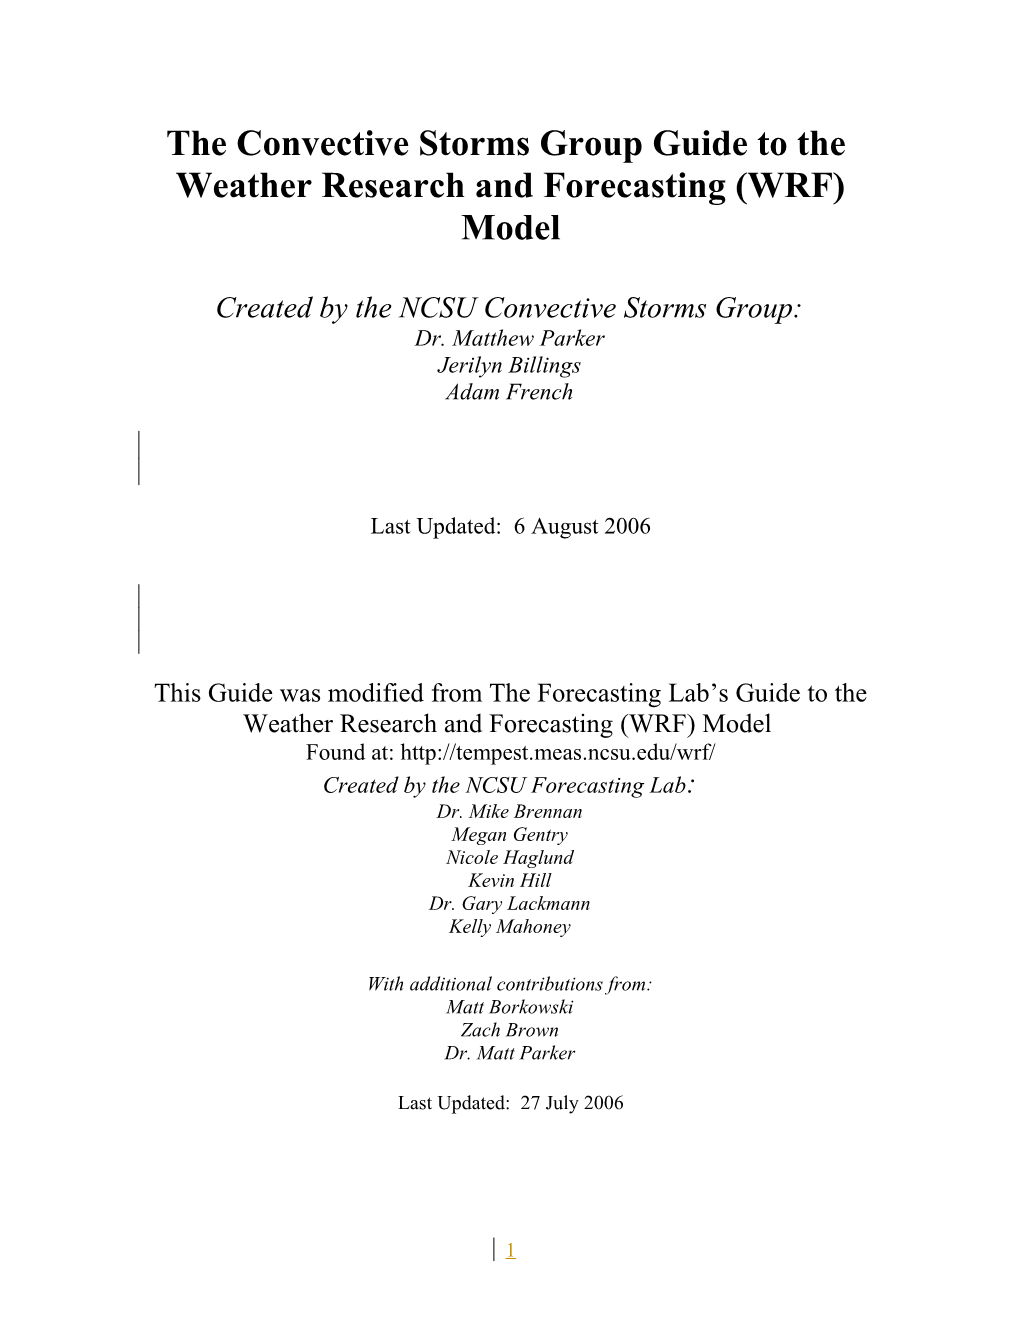 The Convective Storms Group Guide to The